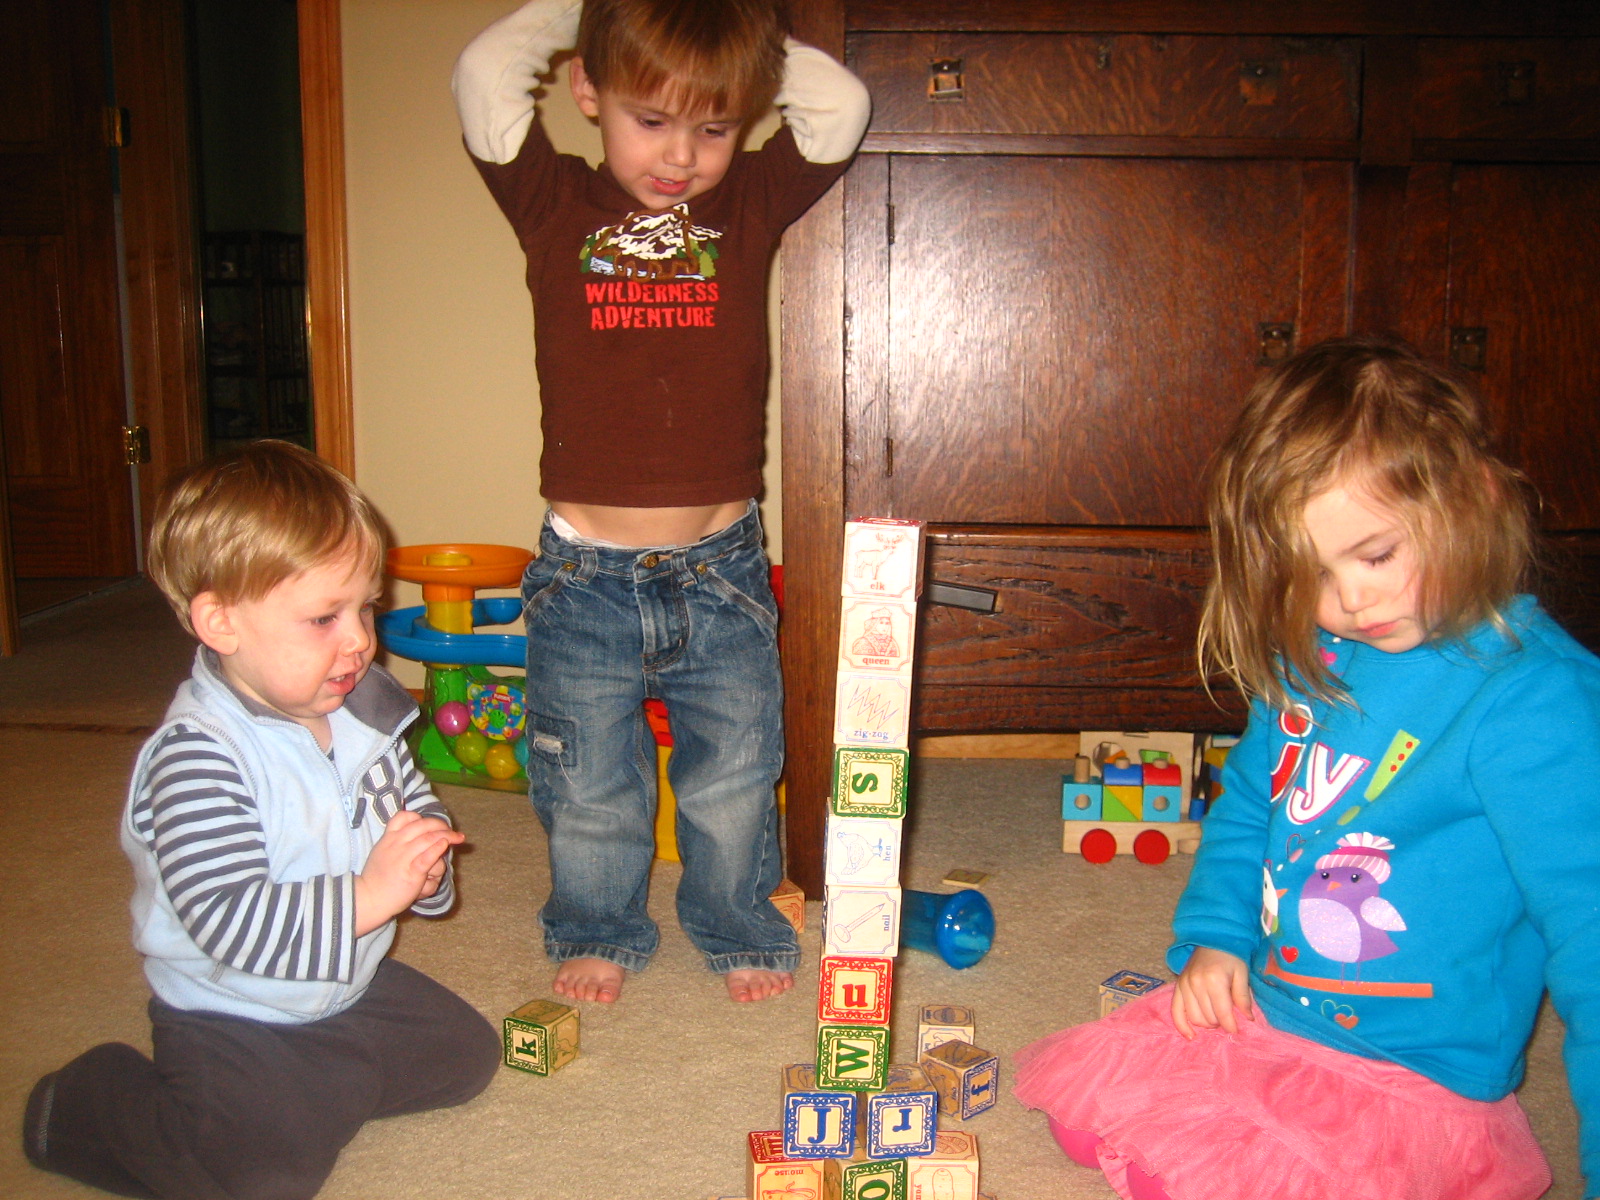 Children Playing With Toys Together